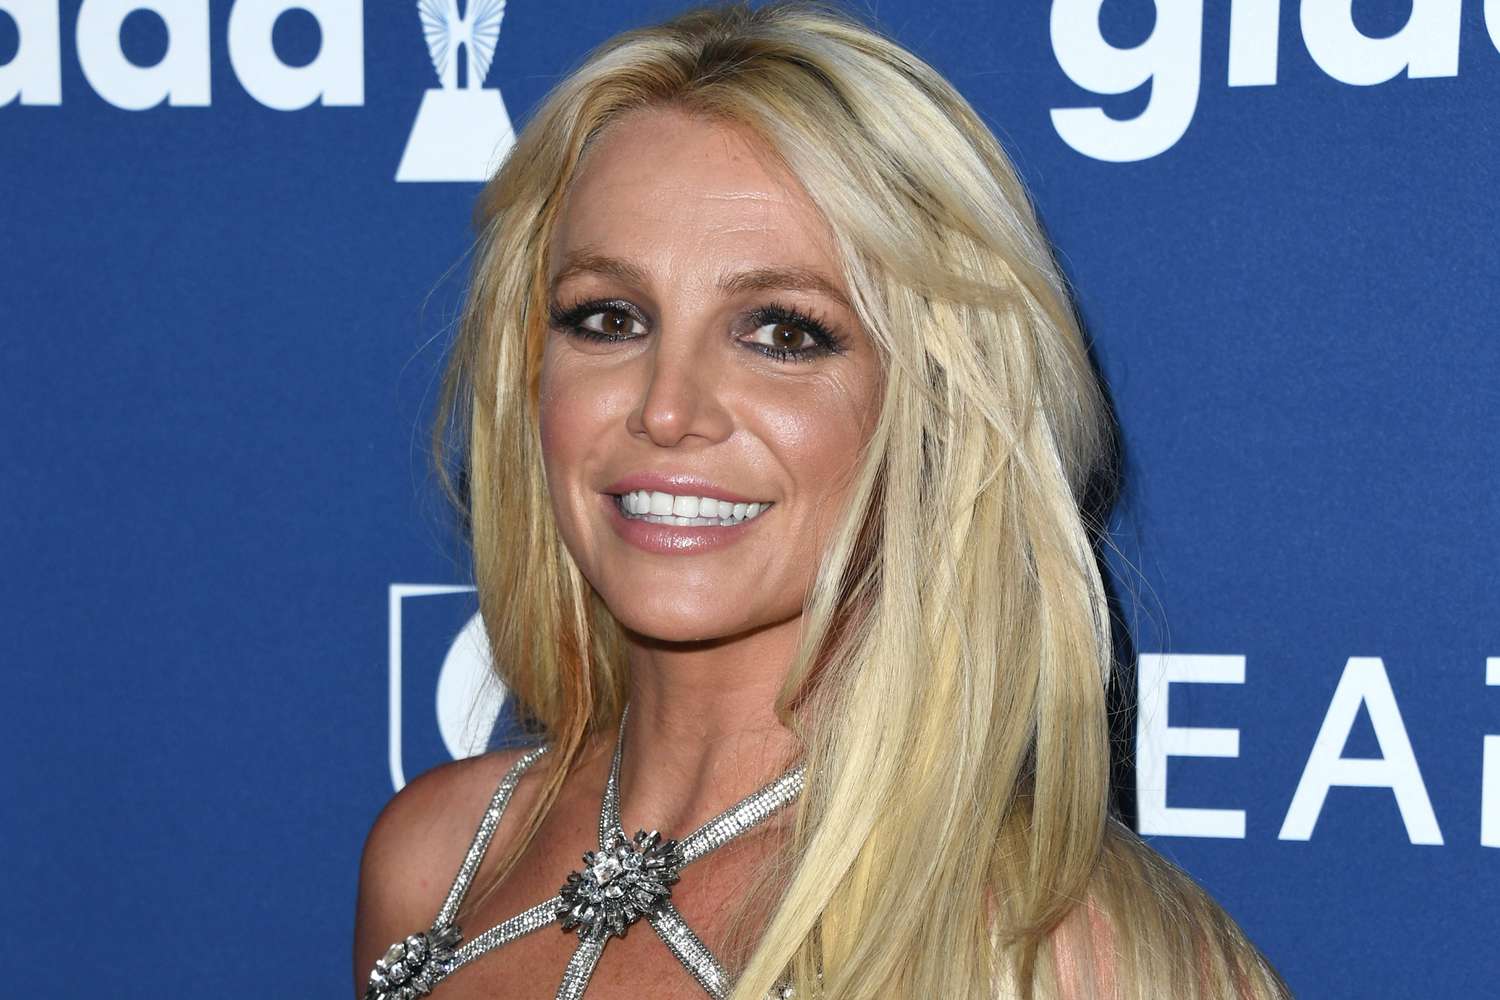 Britney Spears Focusing On Personal Life, Not Working On New Album